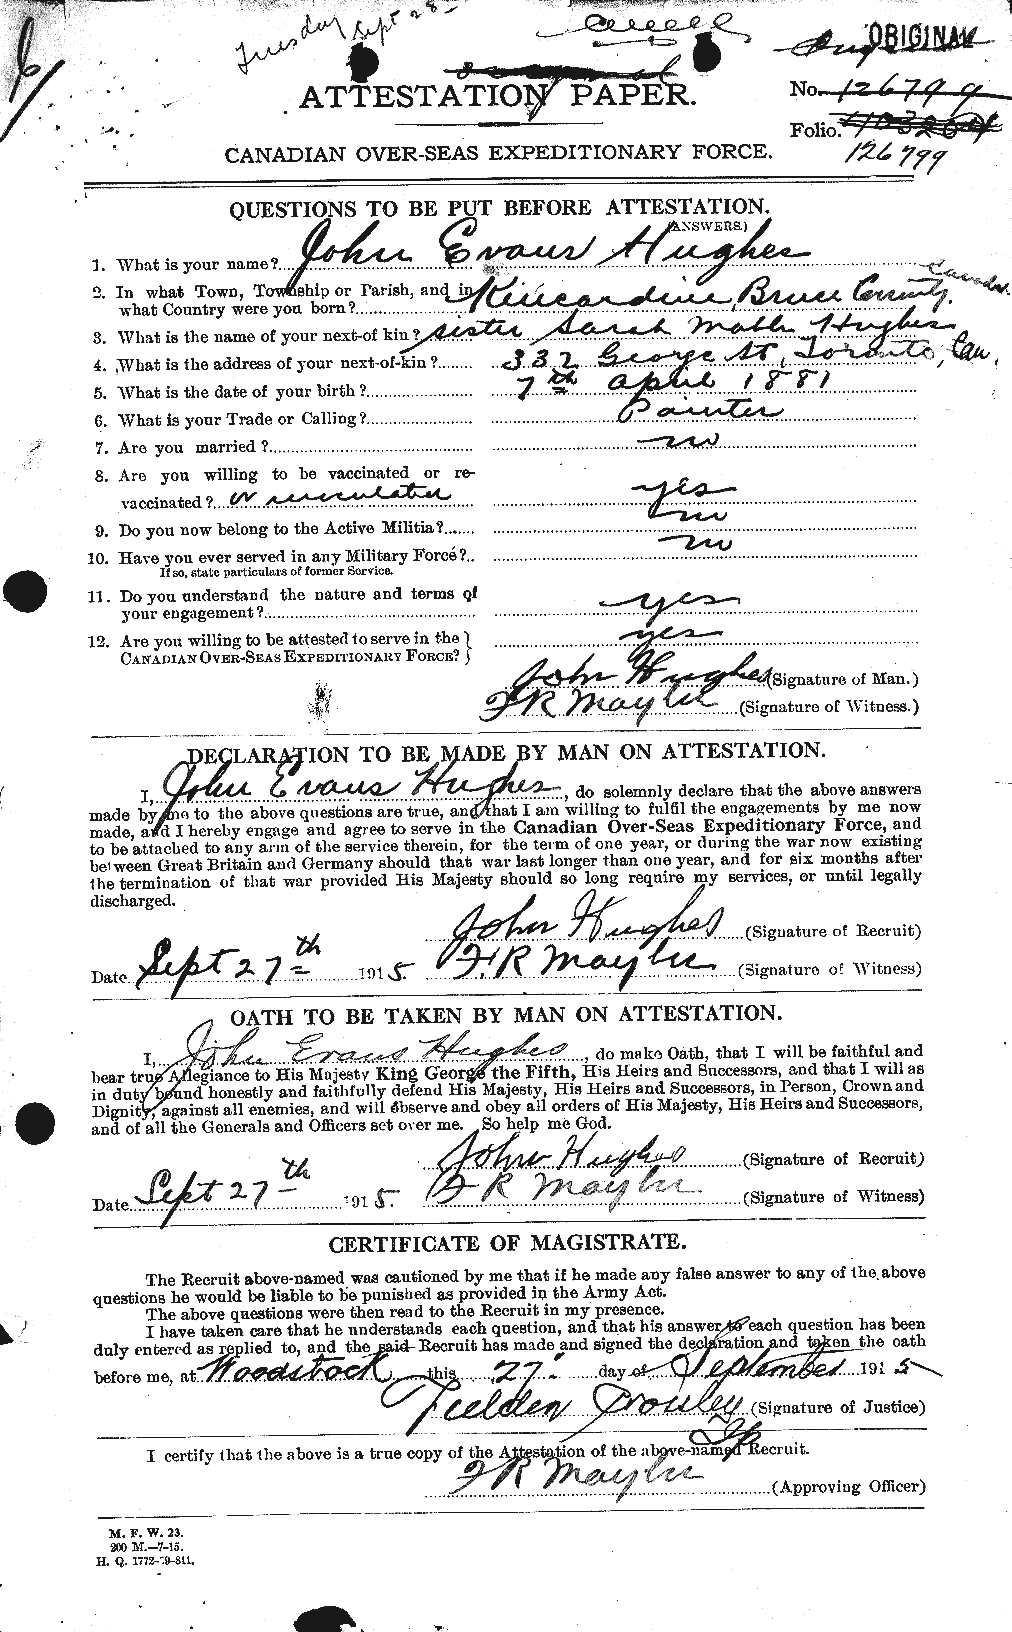 Personnel Records of the First World War - CEF 404017a